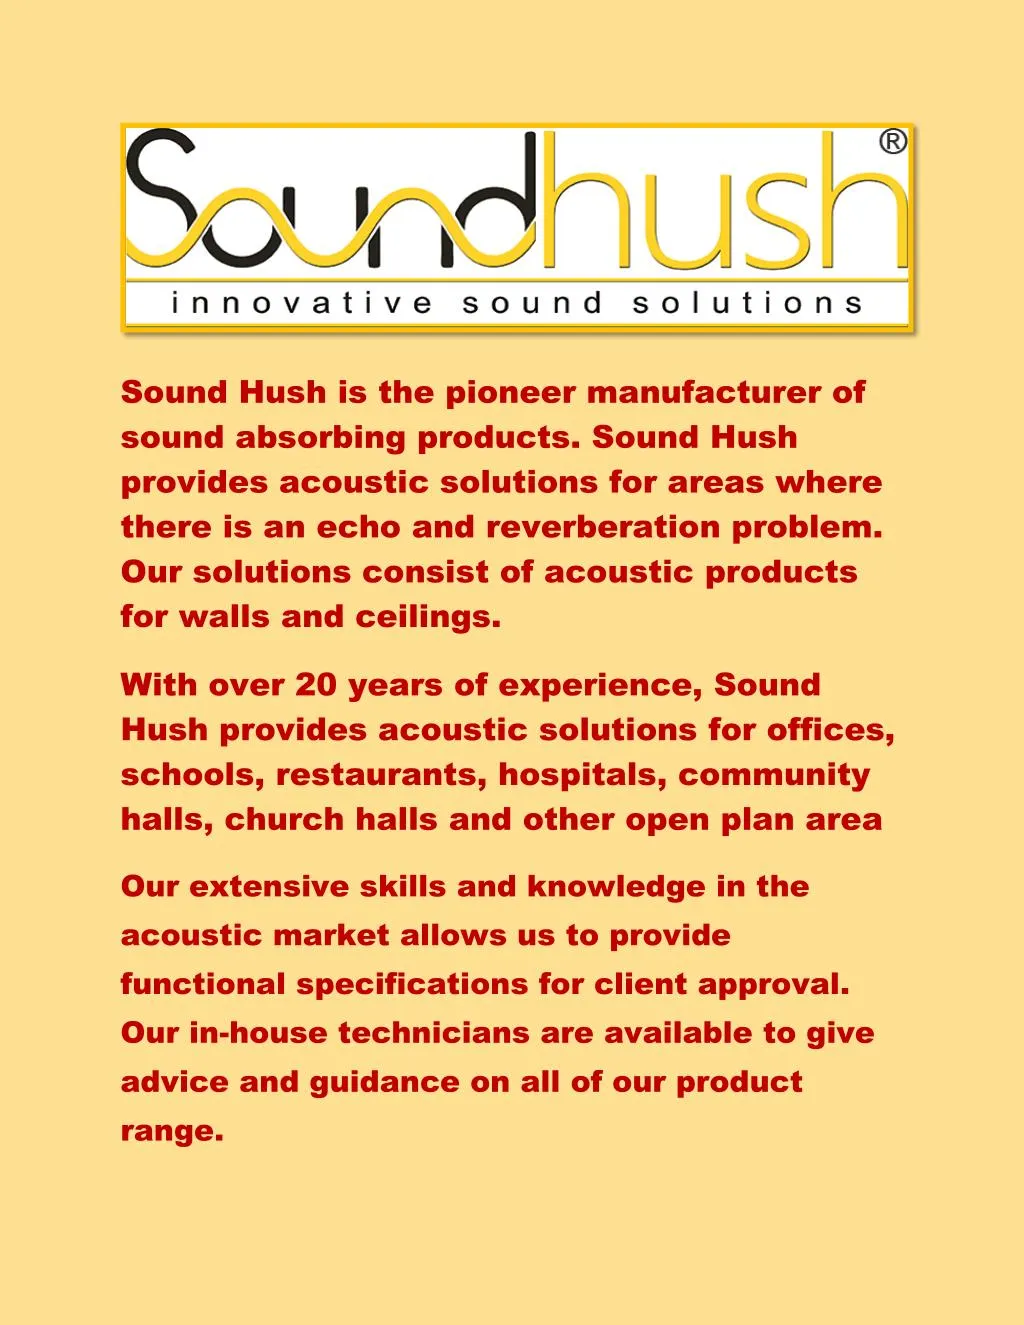 sound hush is the pioneer manufacturer of sound